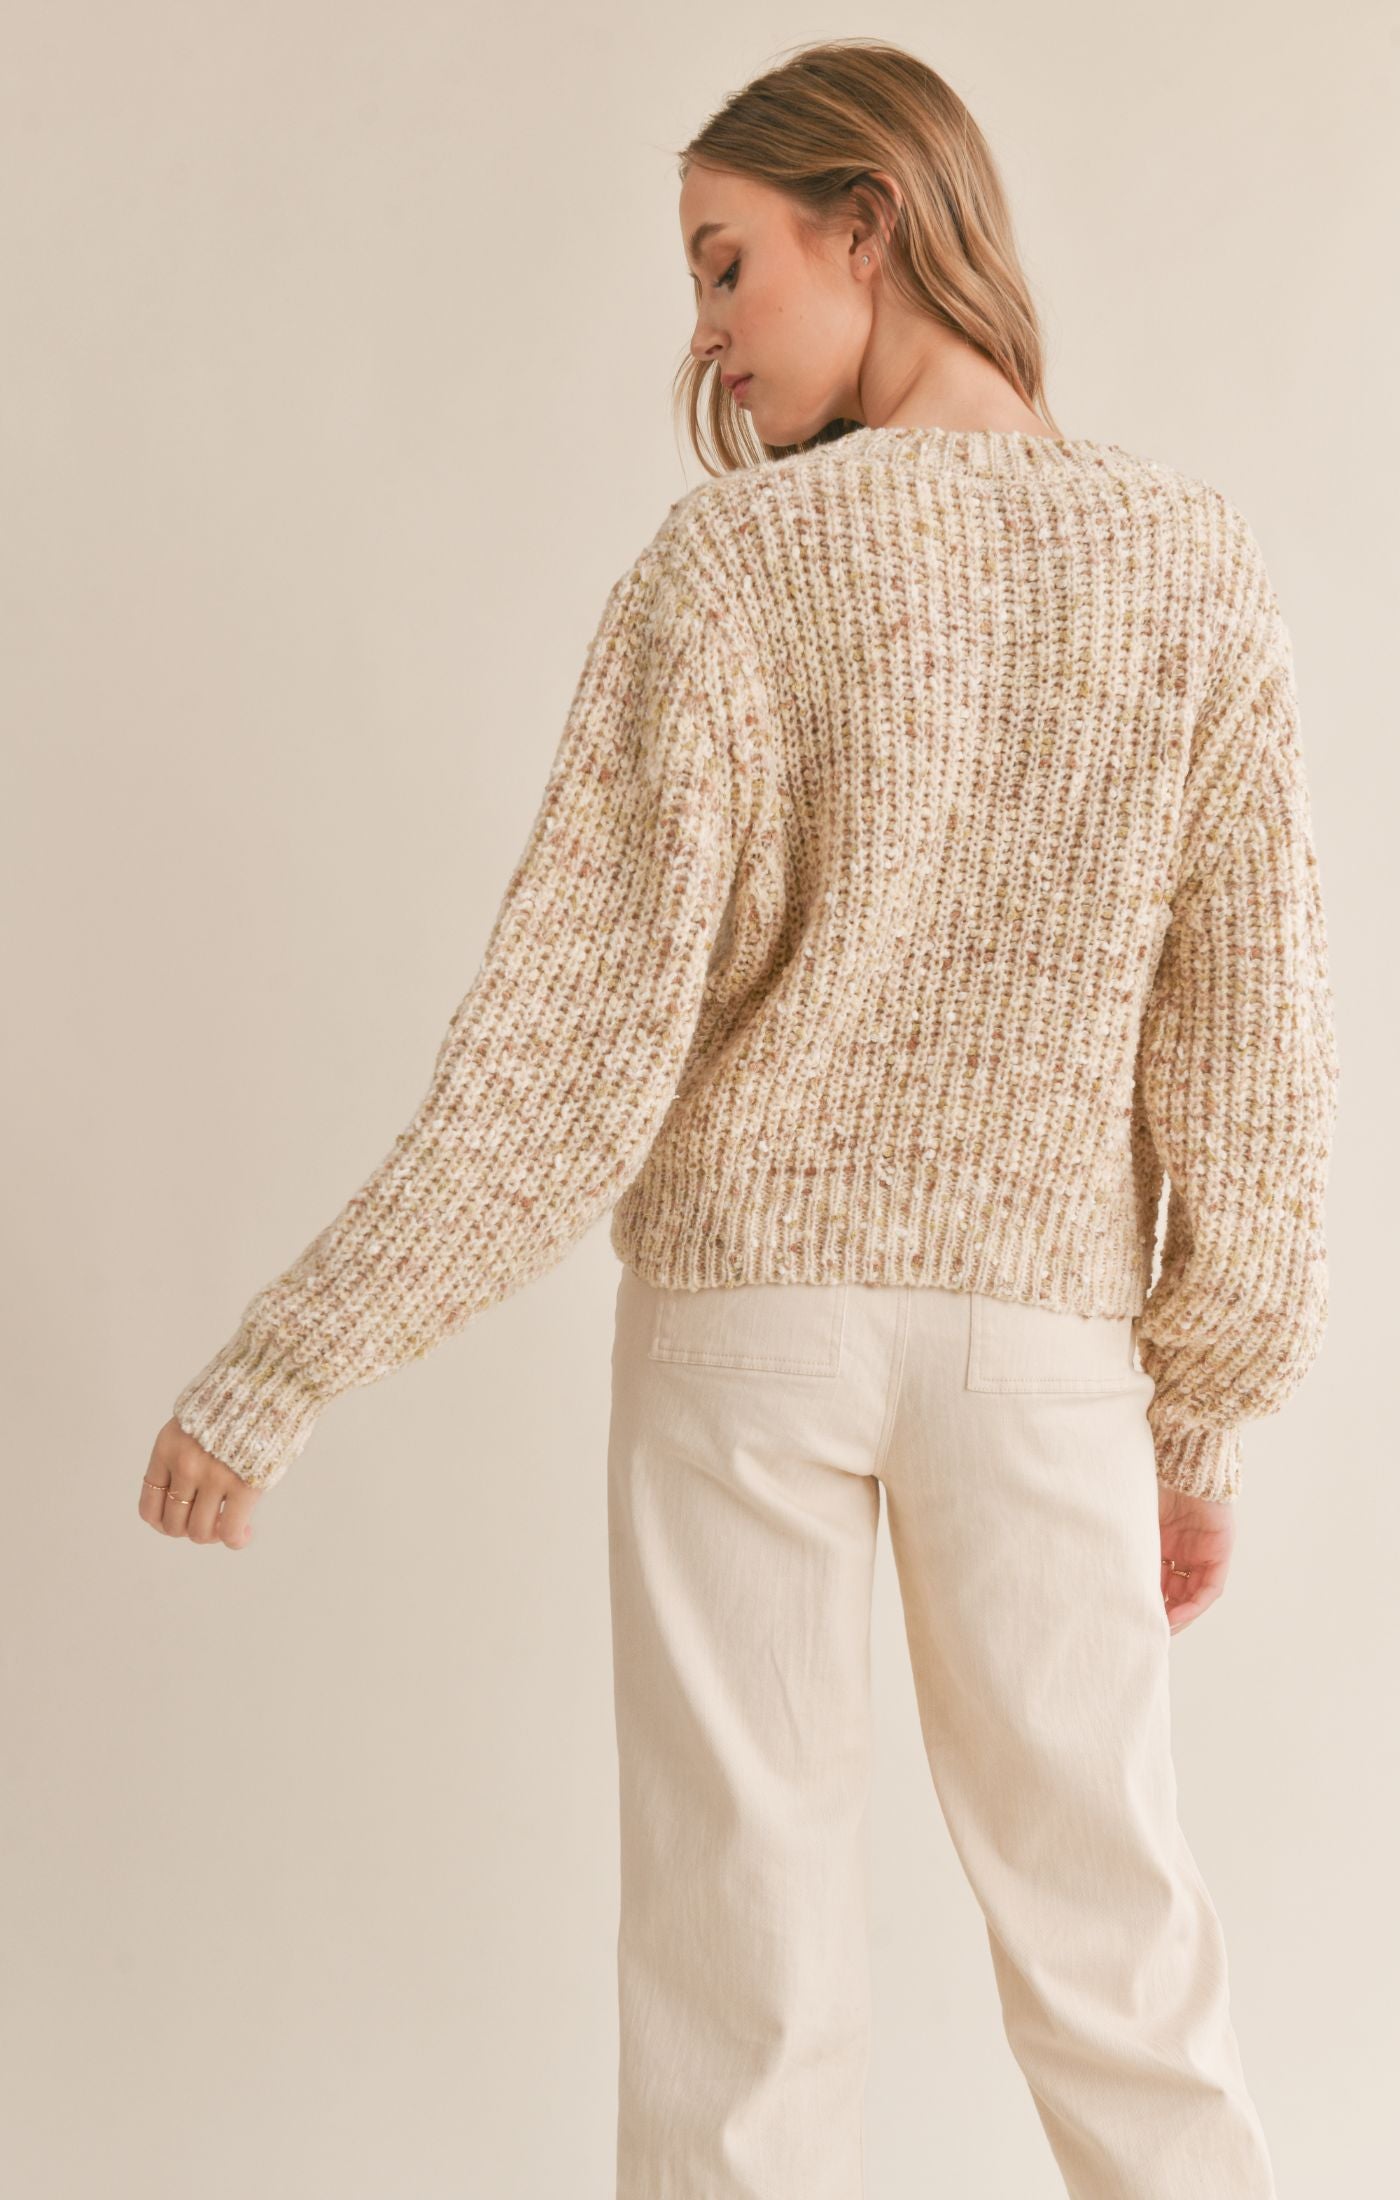 Harley Speckled Knit Sweater - shopatgrace.com